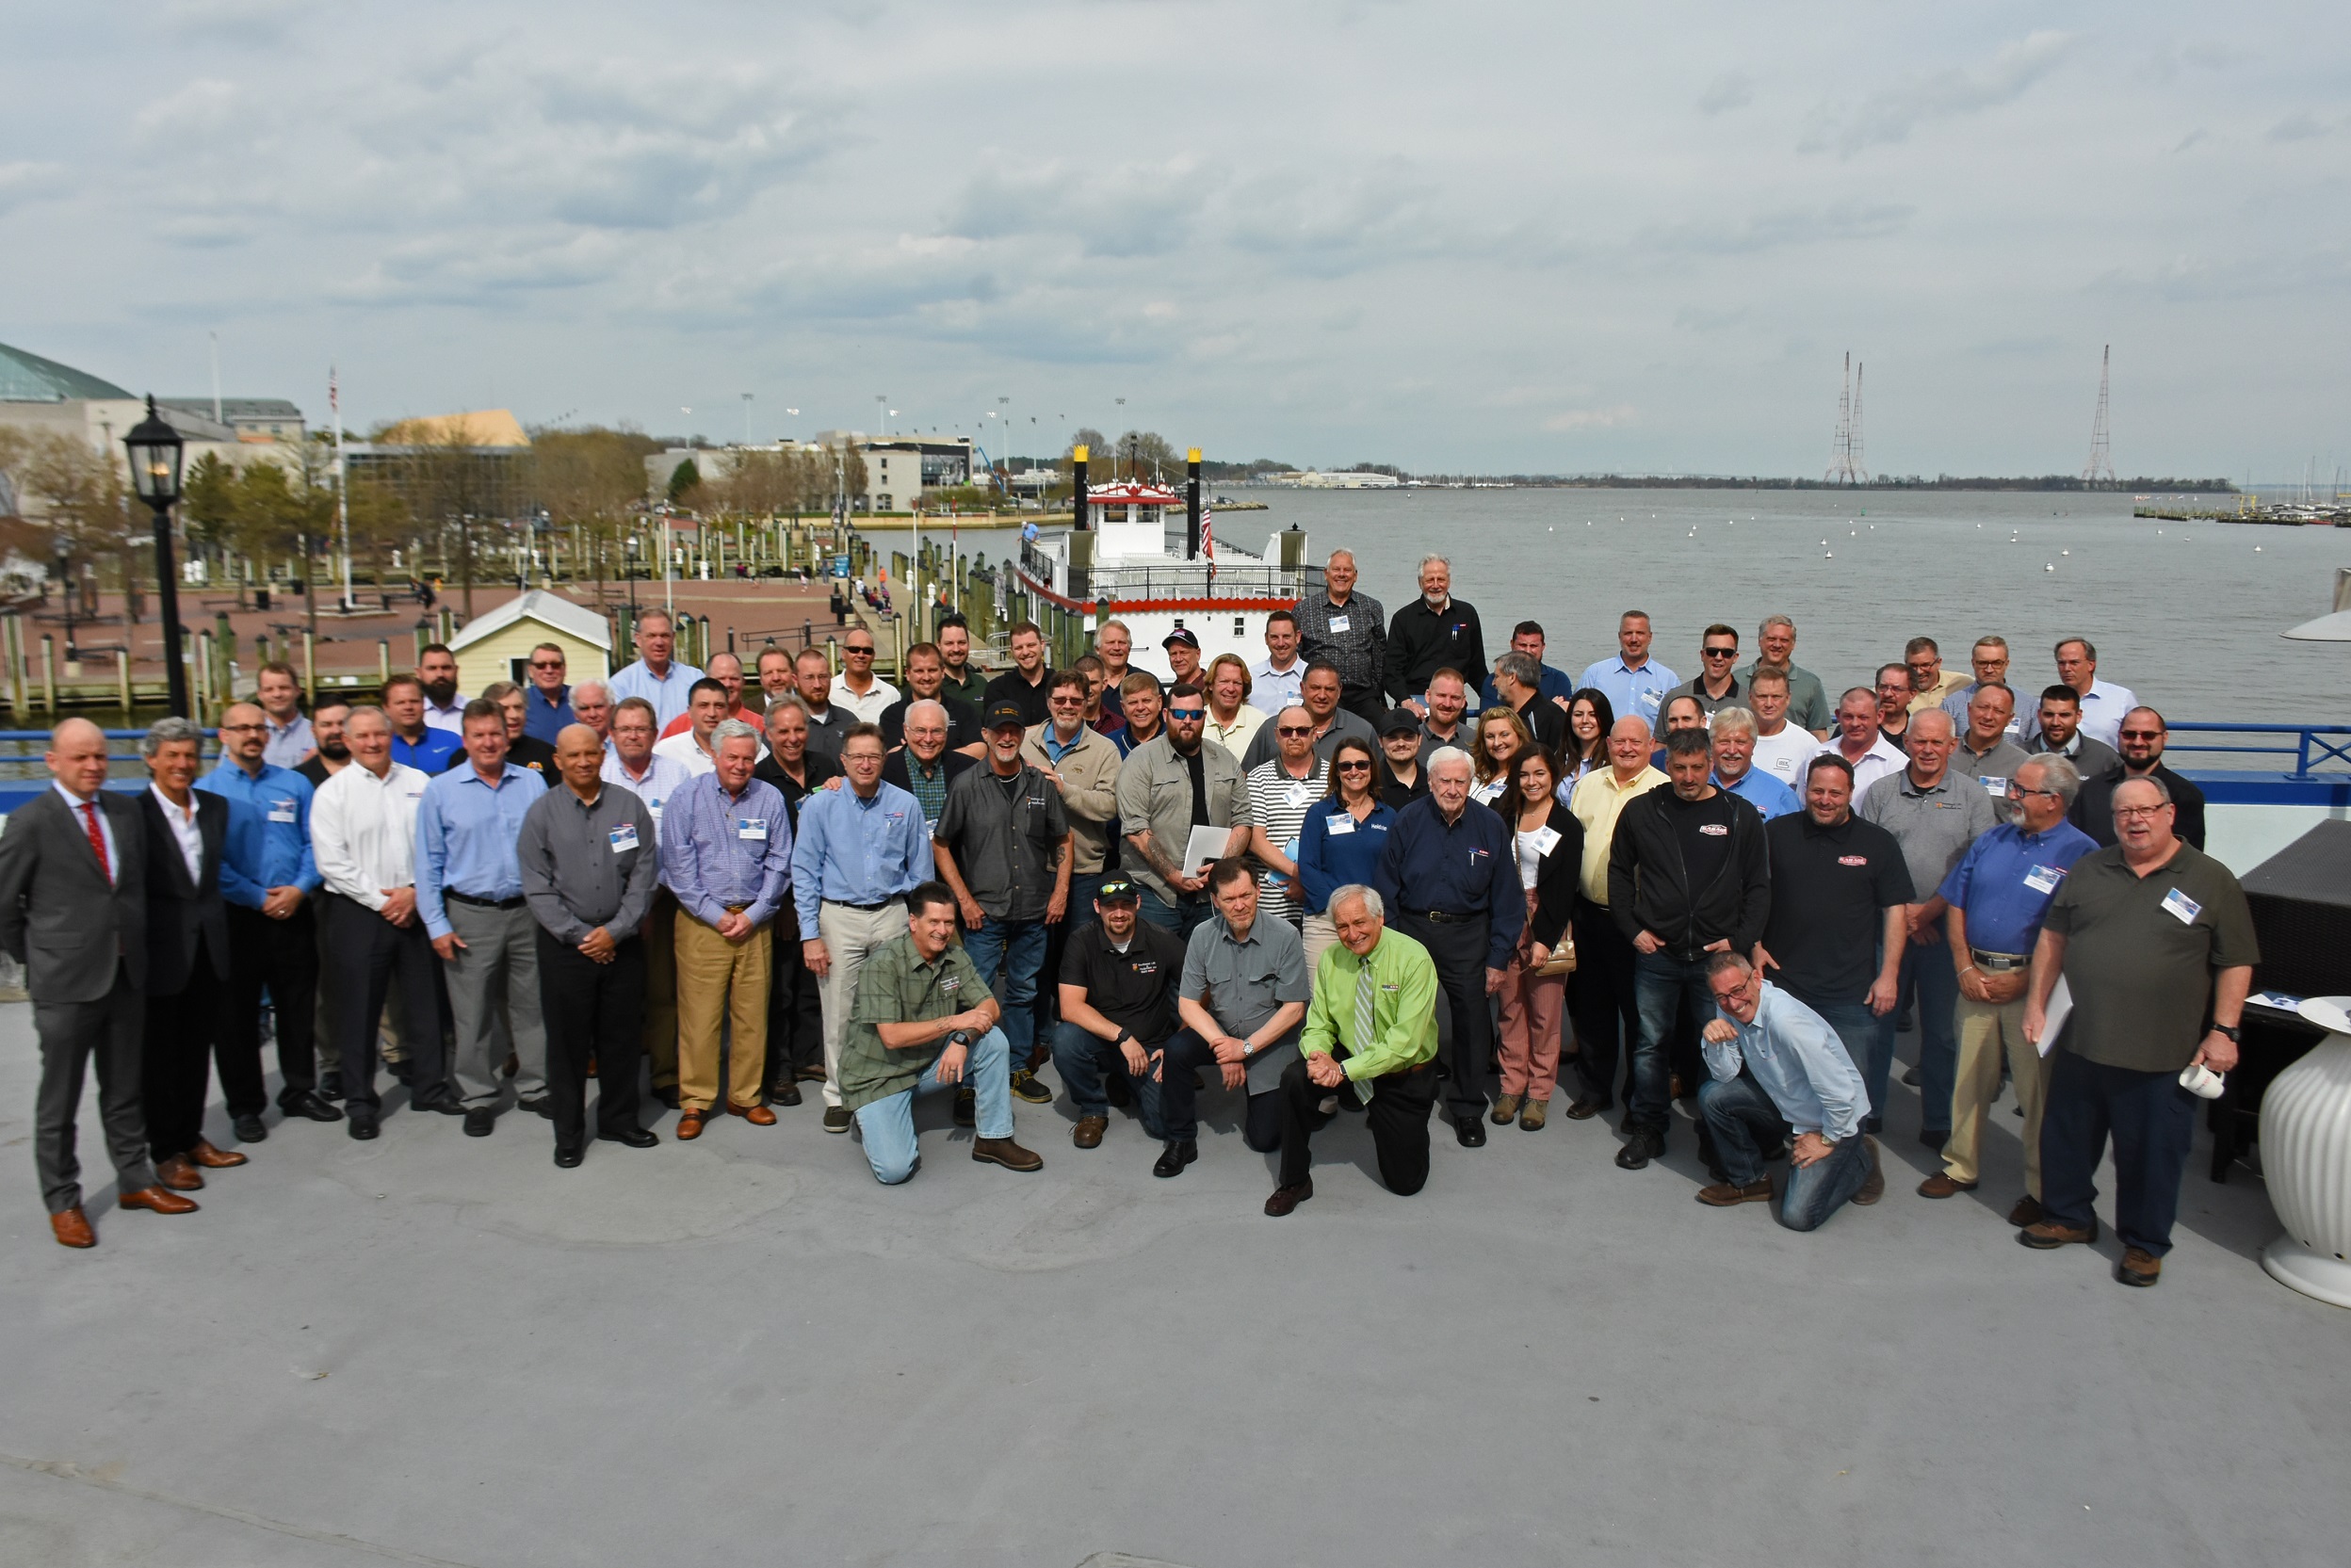 100% of the Stertil-Koni Distributor base was represented at its Annual Distributor Meeting, with business attendees pictured here in historic Annapolis, Maryland